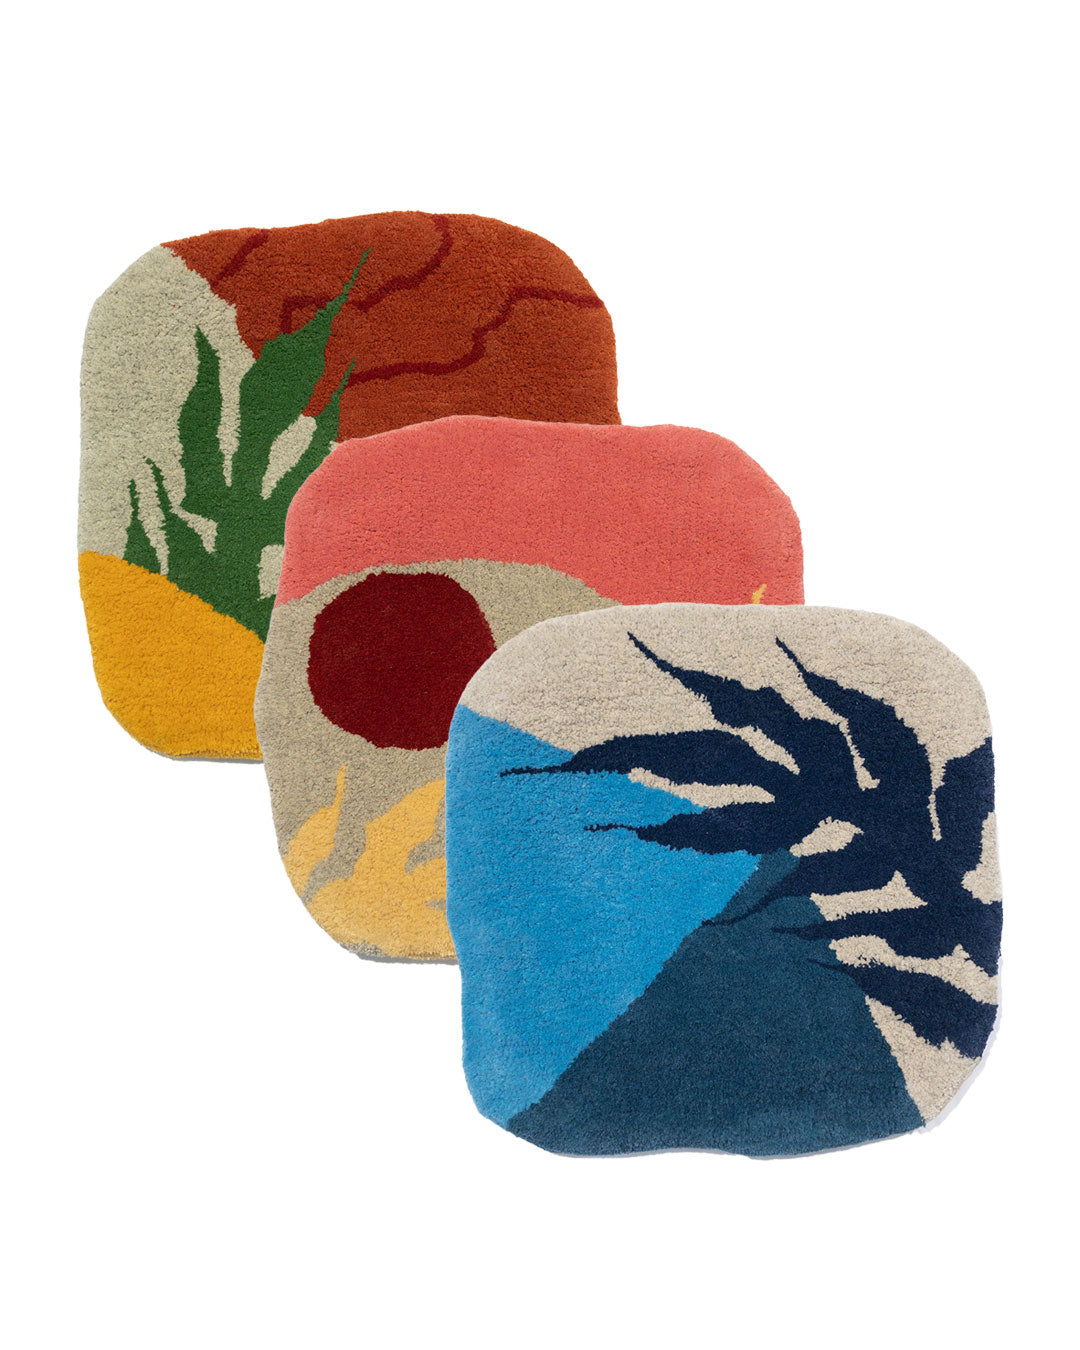 Chair covers tufted rugs MIX - set of 6 Maxime Mouroux